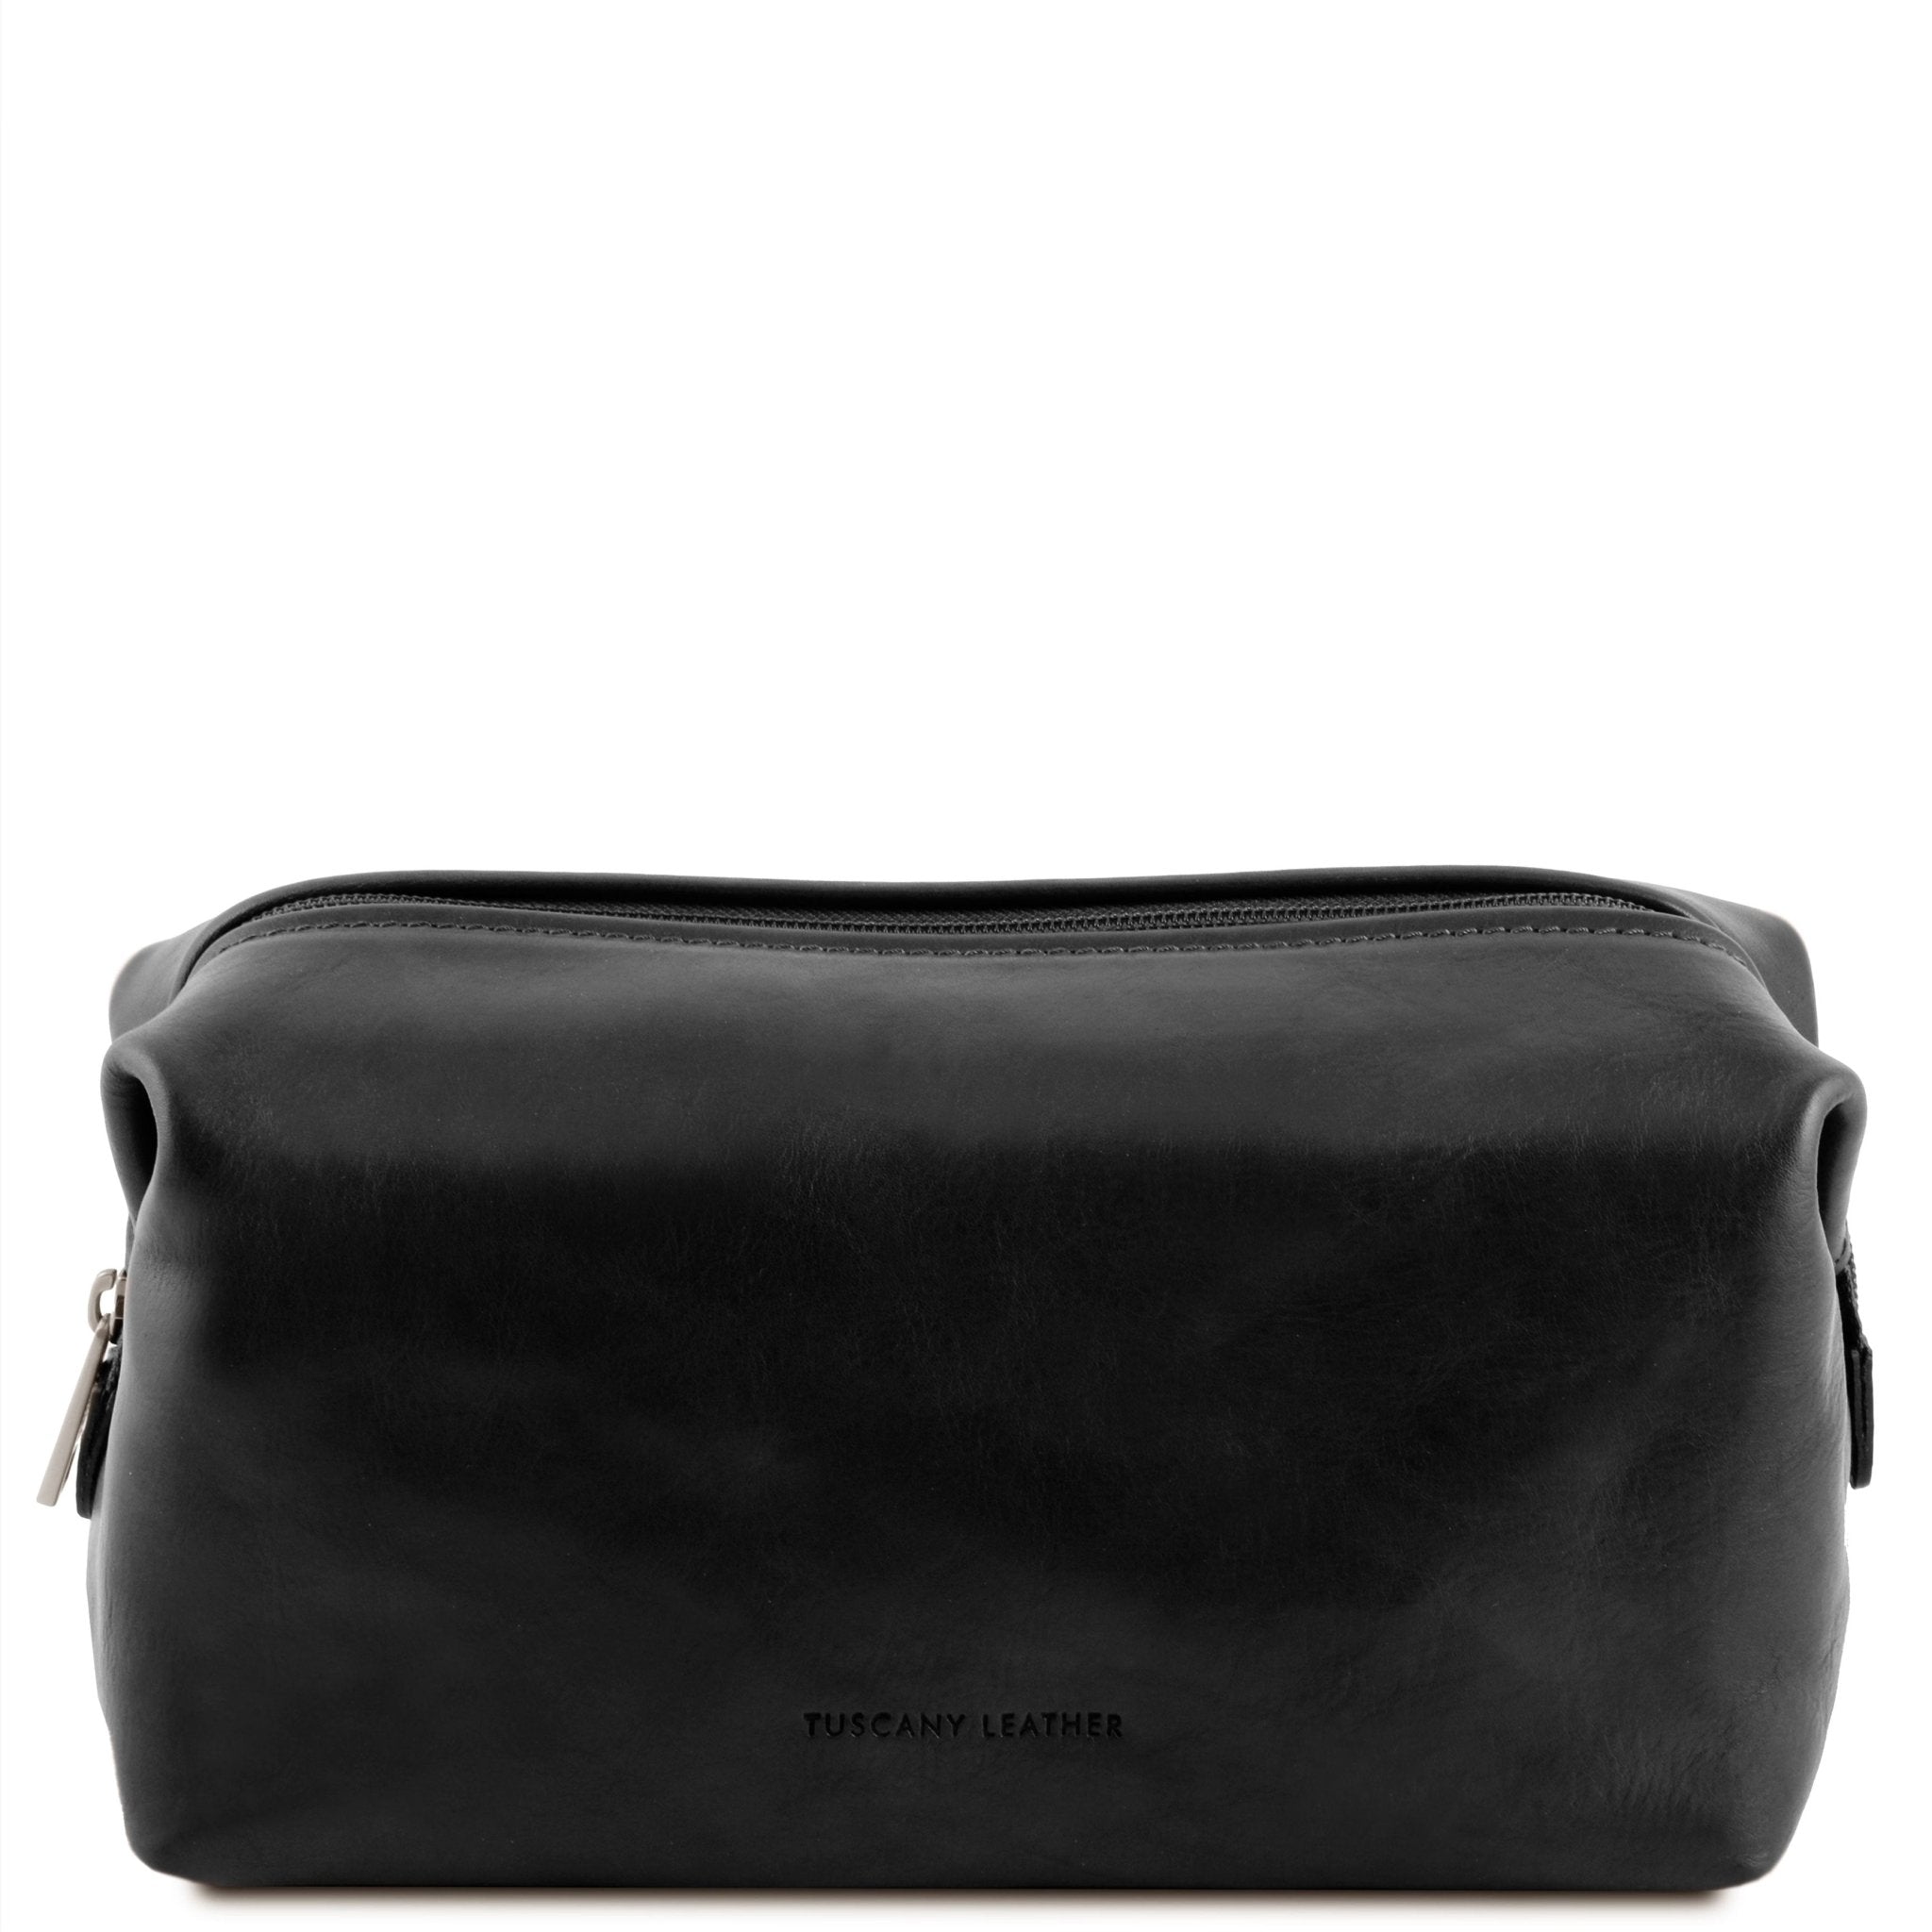 Smarty Leather Italian Toilet Bag - Small Size - L'Atelier Global